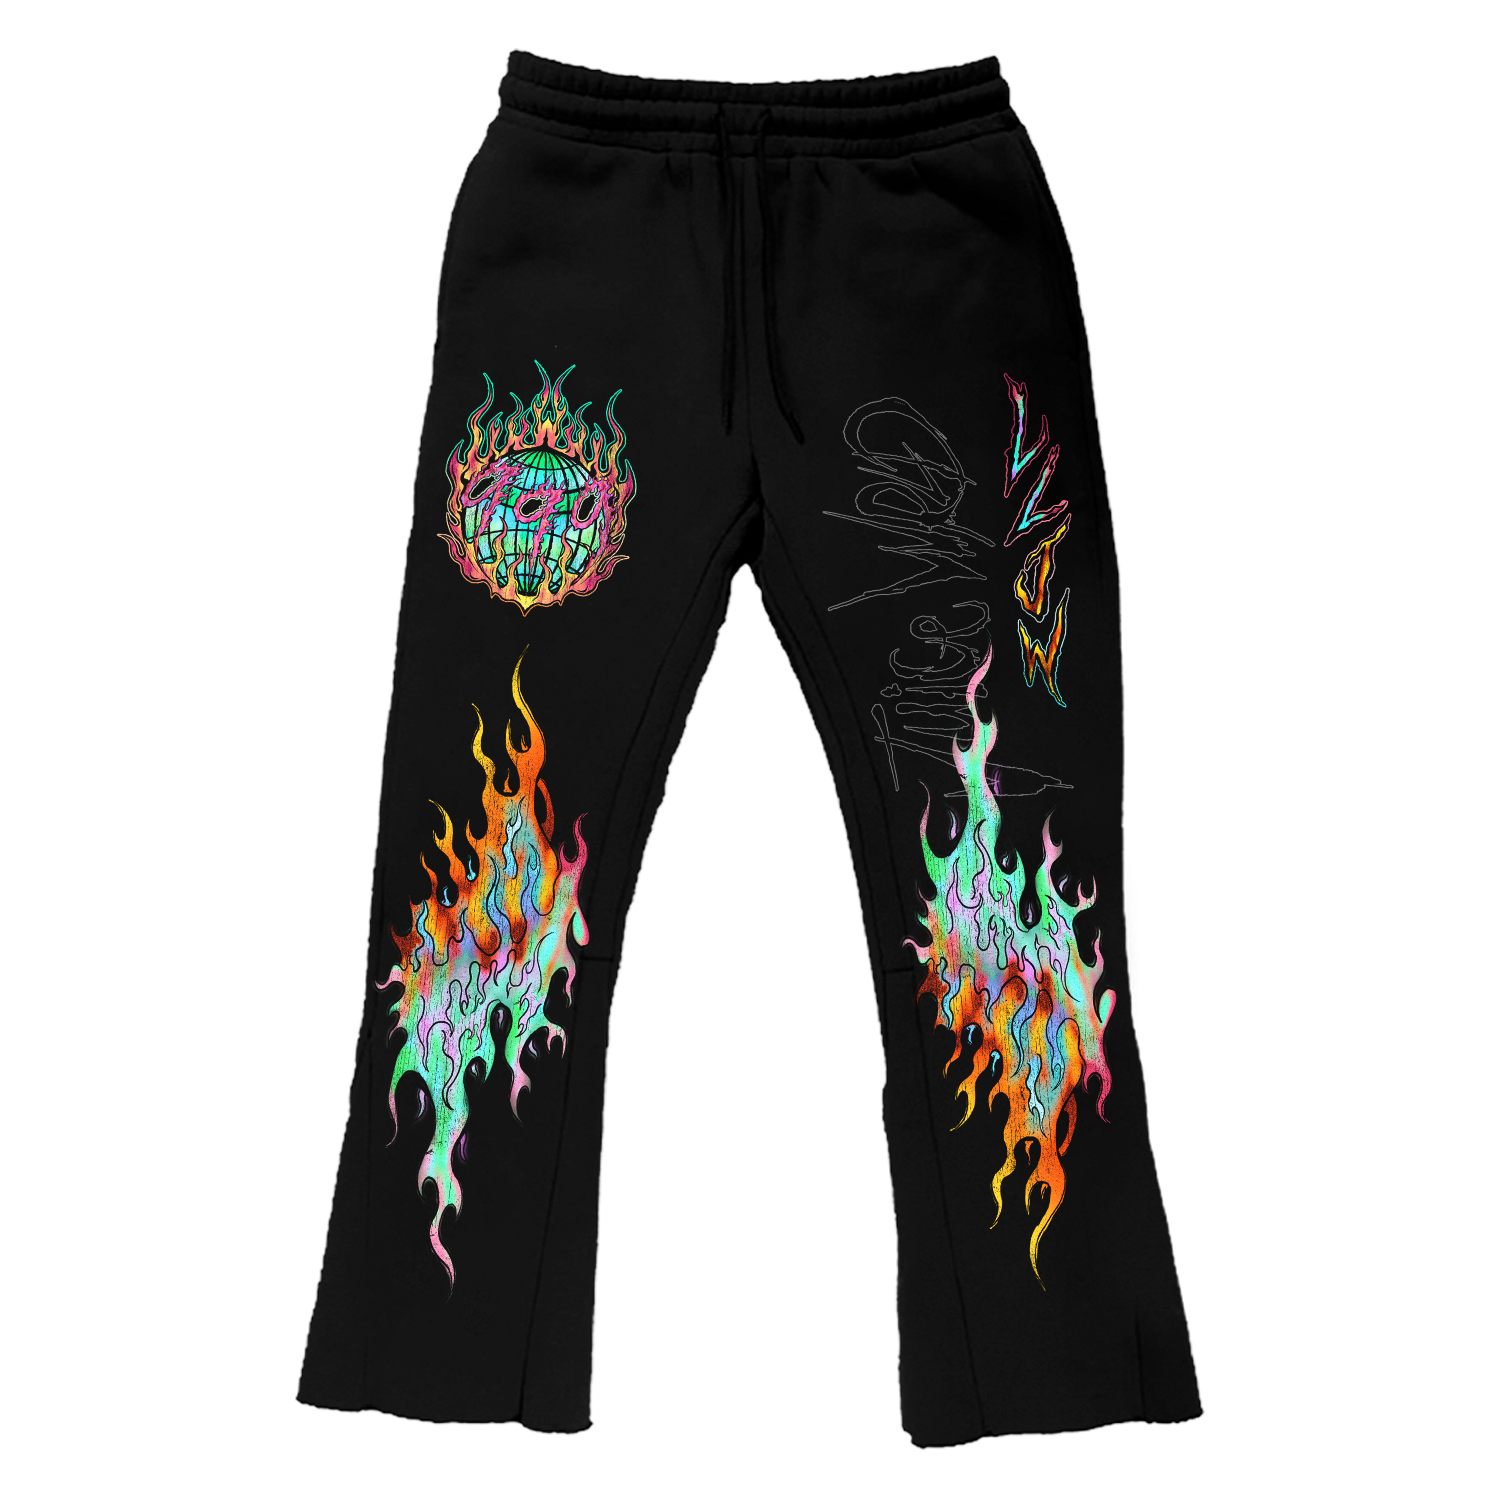 UP IN FLAMES SWEATPANTS